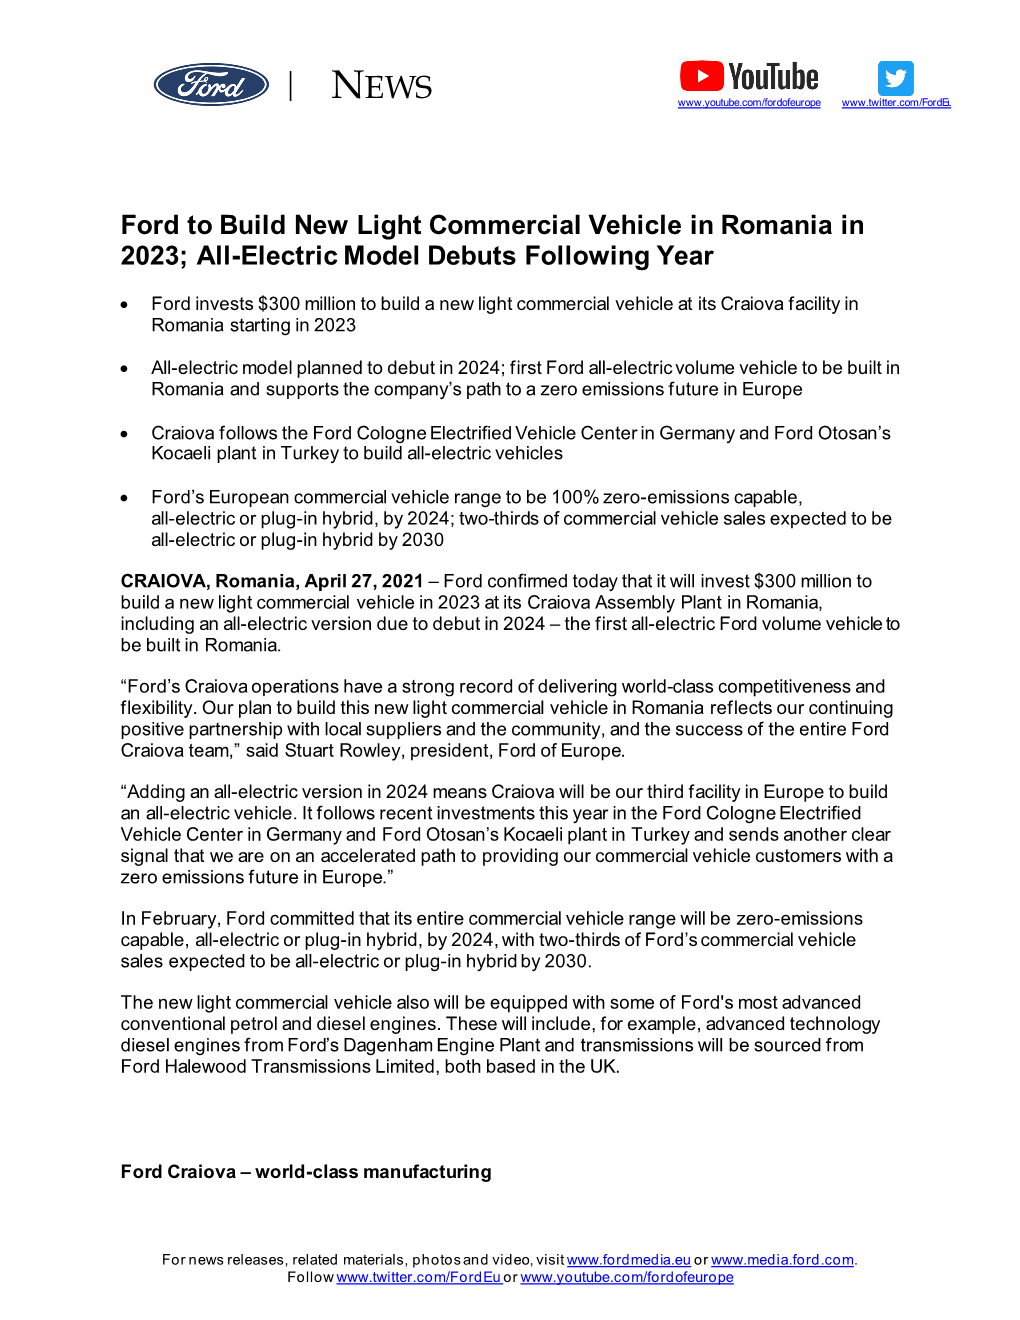 Ford to Build New Light Commercial Vehicle in Romania April 27 2021